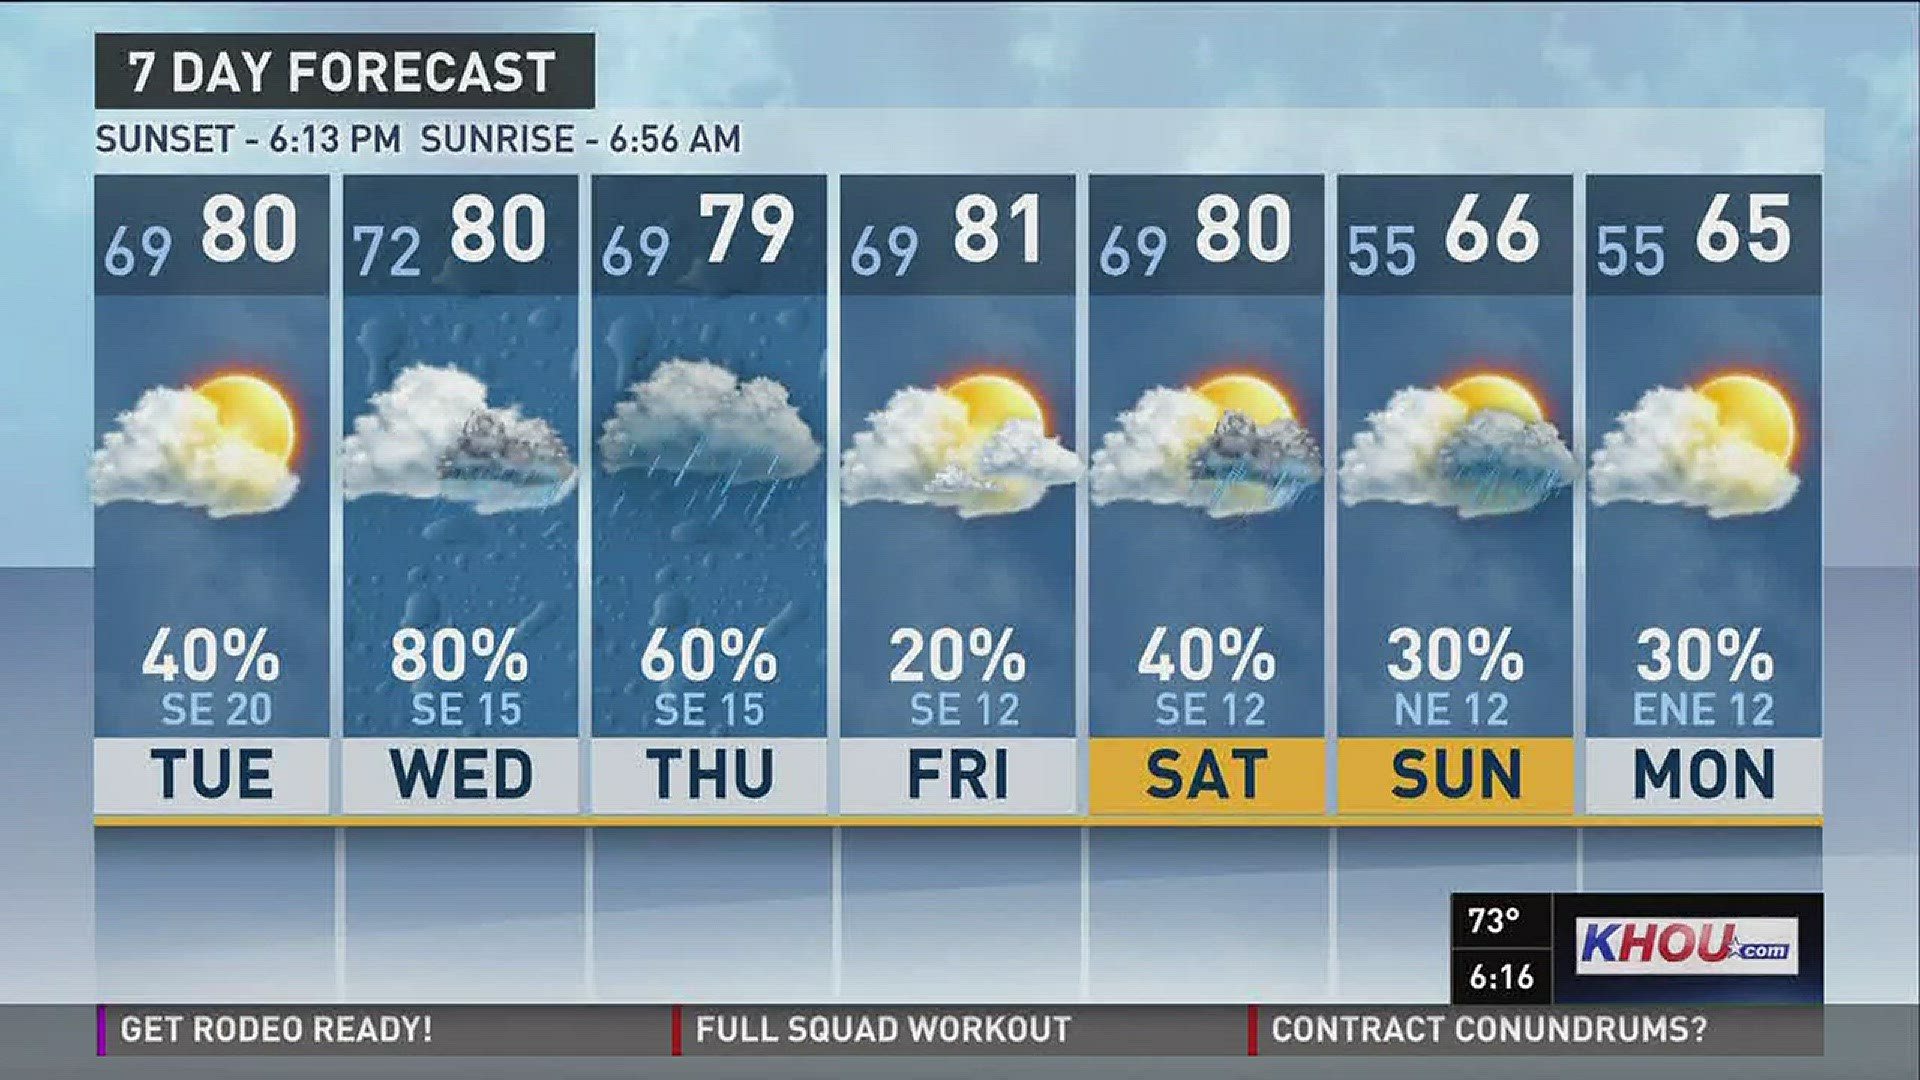 KHOU 11 Chief Meteorologist David Paul says there is heavy rain in the future forecast.